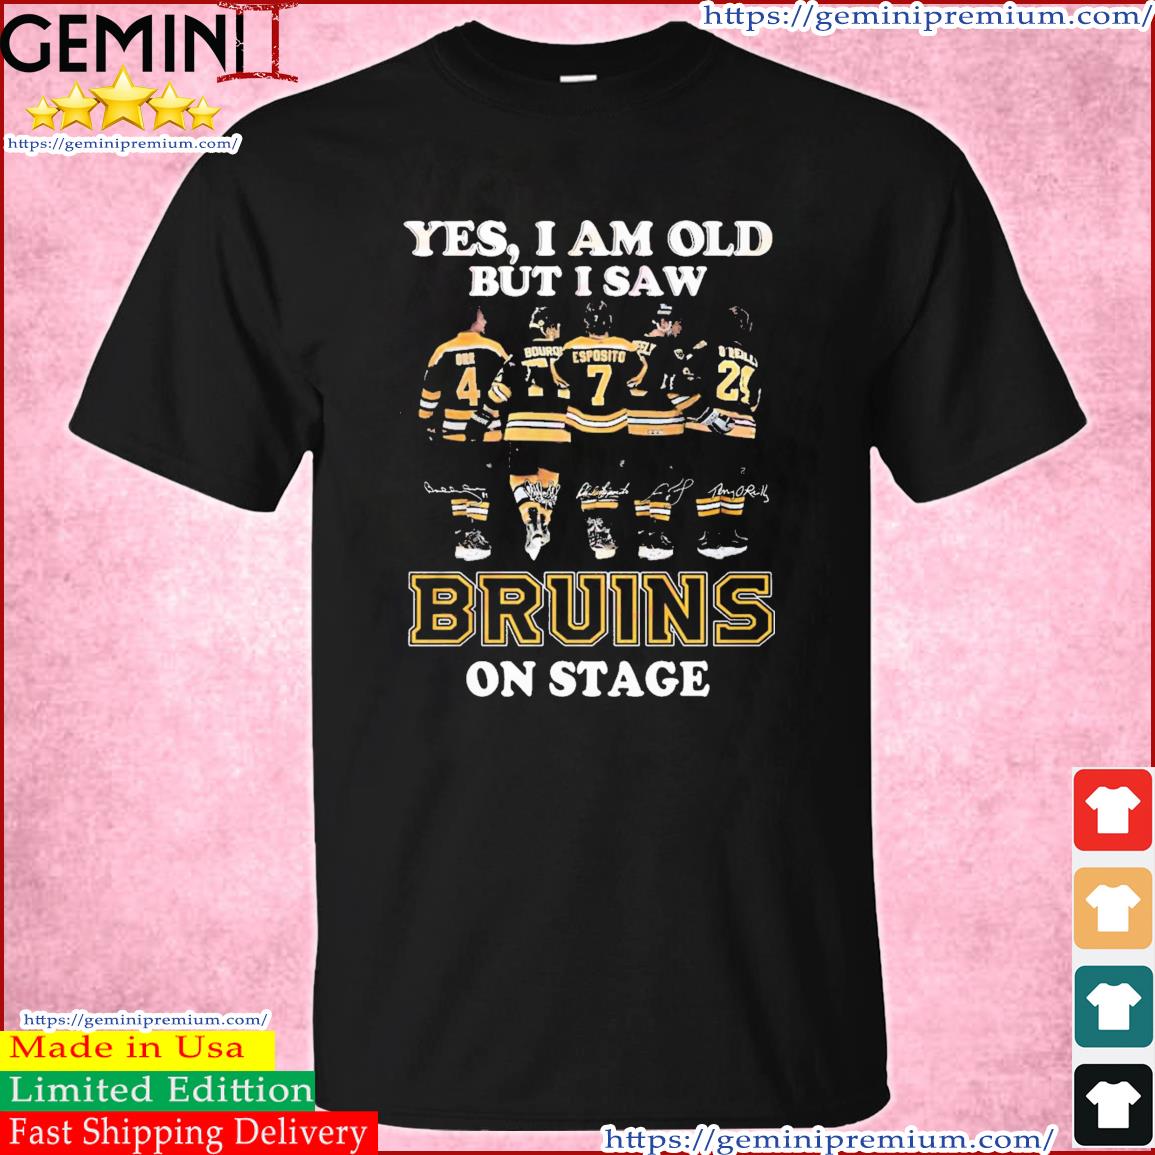 Yes, I Am Old But I Saw Bruins Team On Stage T-Shirt